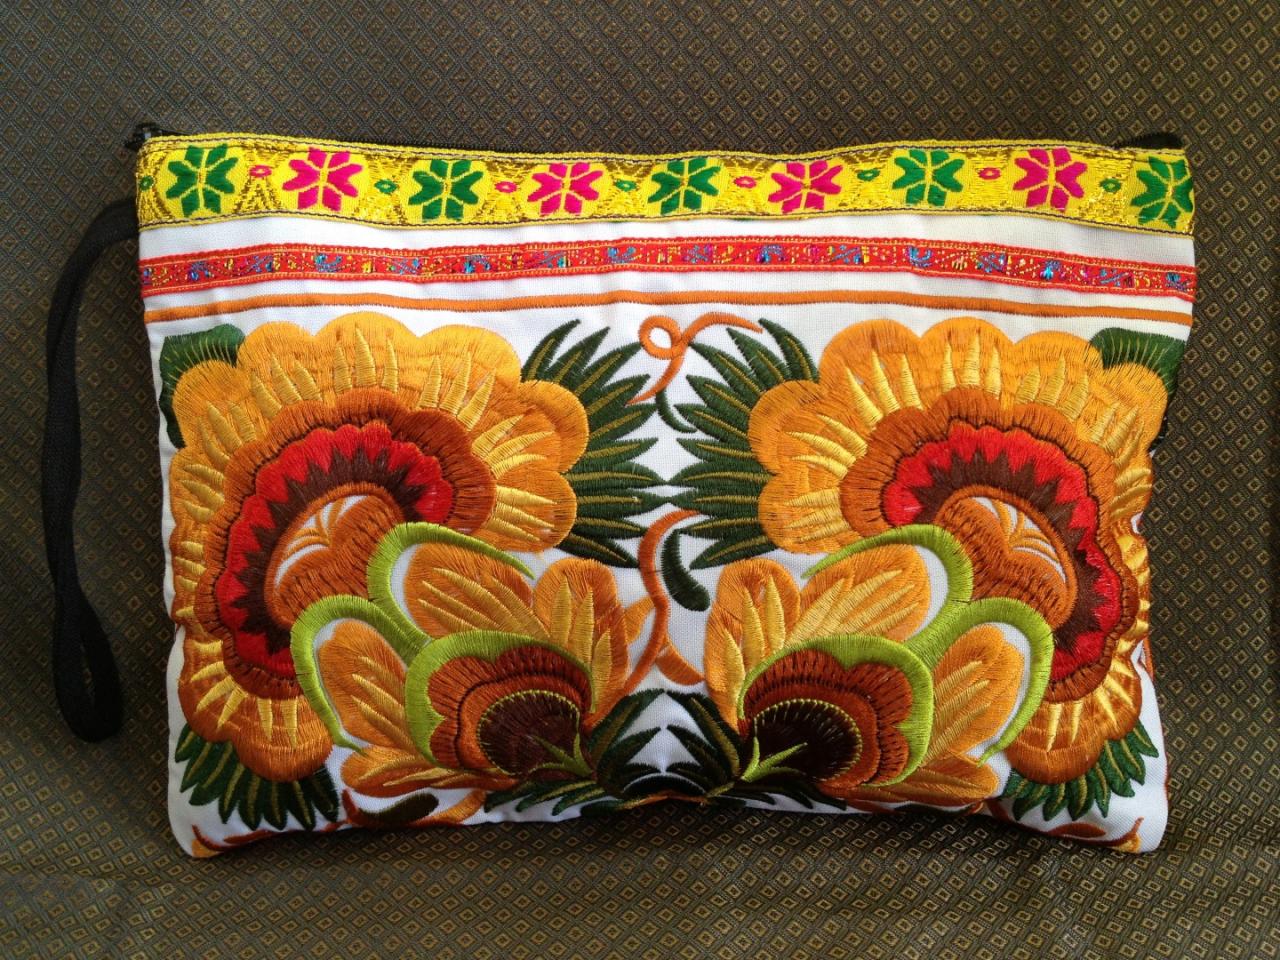 Gold Embroidery Clutch Wristlet Bag White Fabric Of Chinese Hmong Hill Tribe Thailand (kp1053-gowh)